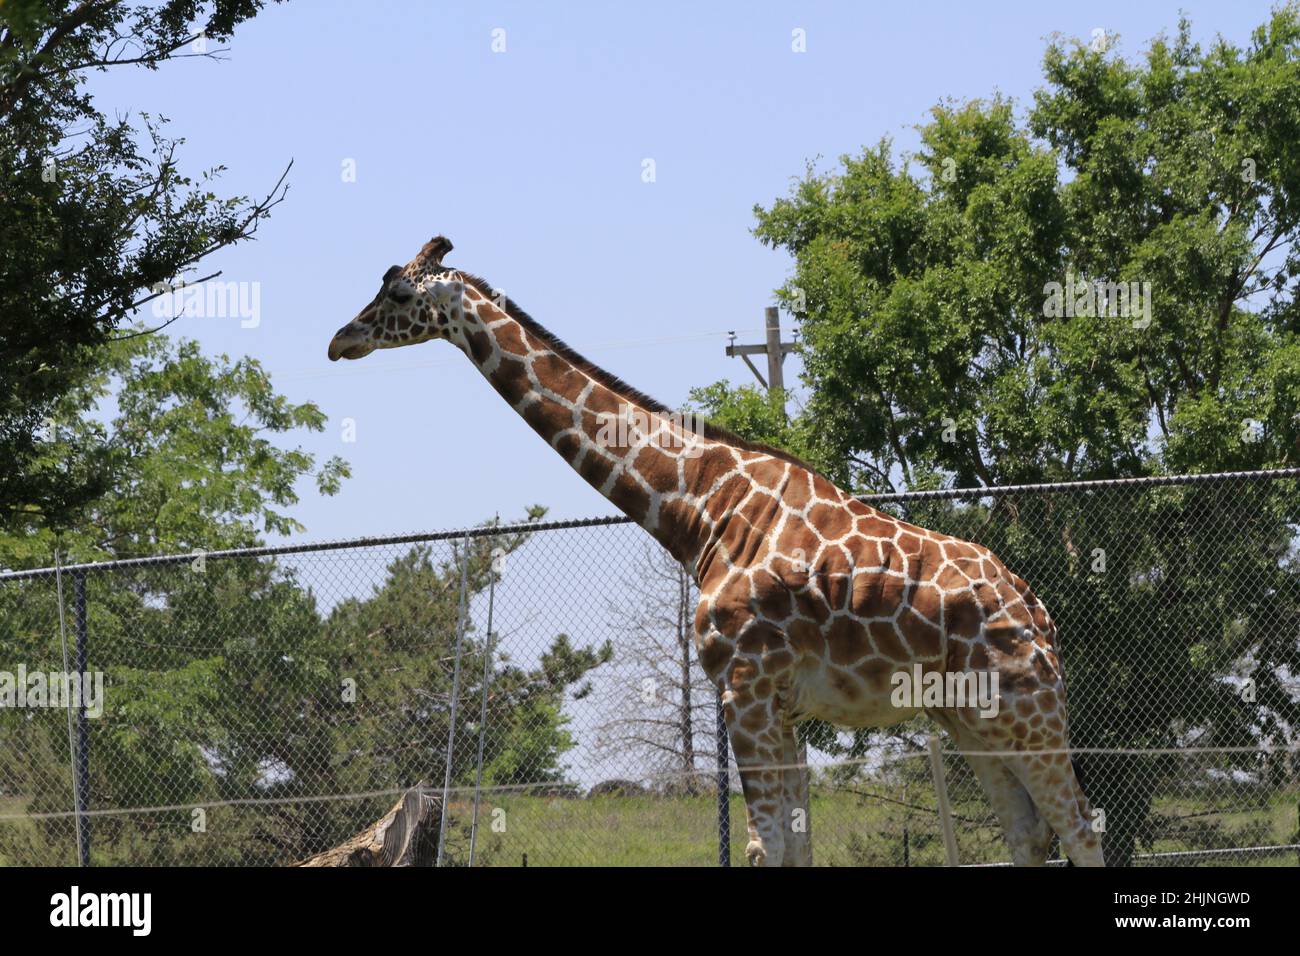 A closeup of a Giraffe that's bright and colorful in Tanganyika Wildlife Park in Kansas Stock Photo